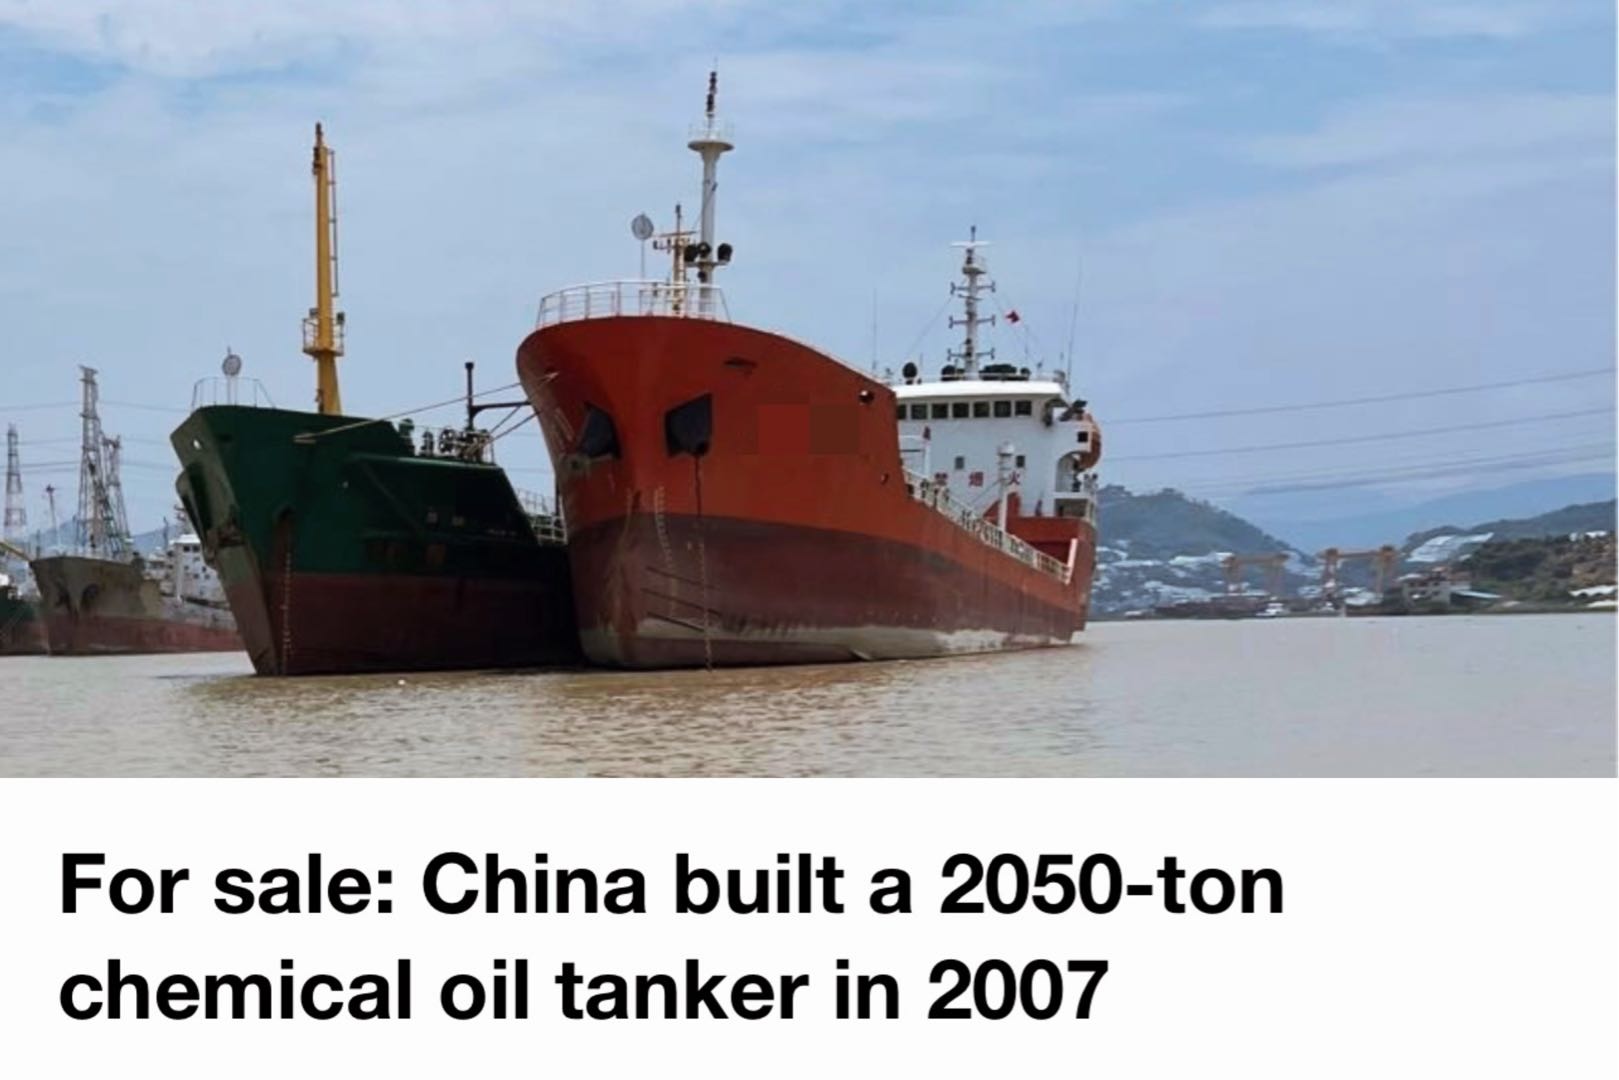 For sale: 2050 tons of chemical oil tanker, built in Zhejiang, China in 2007, suitable for foreign t